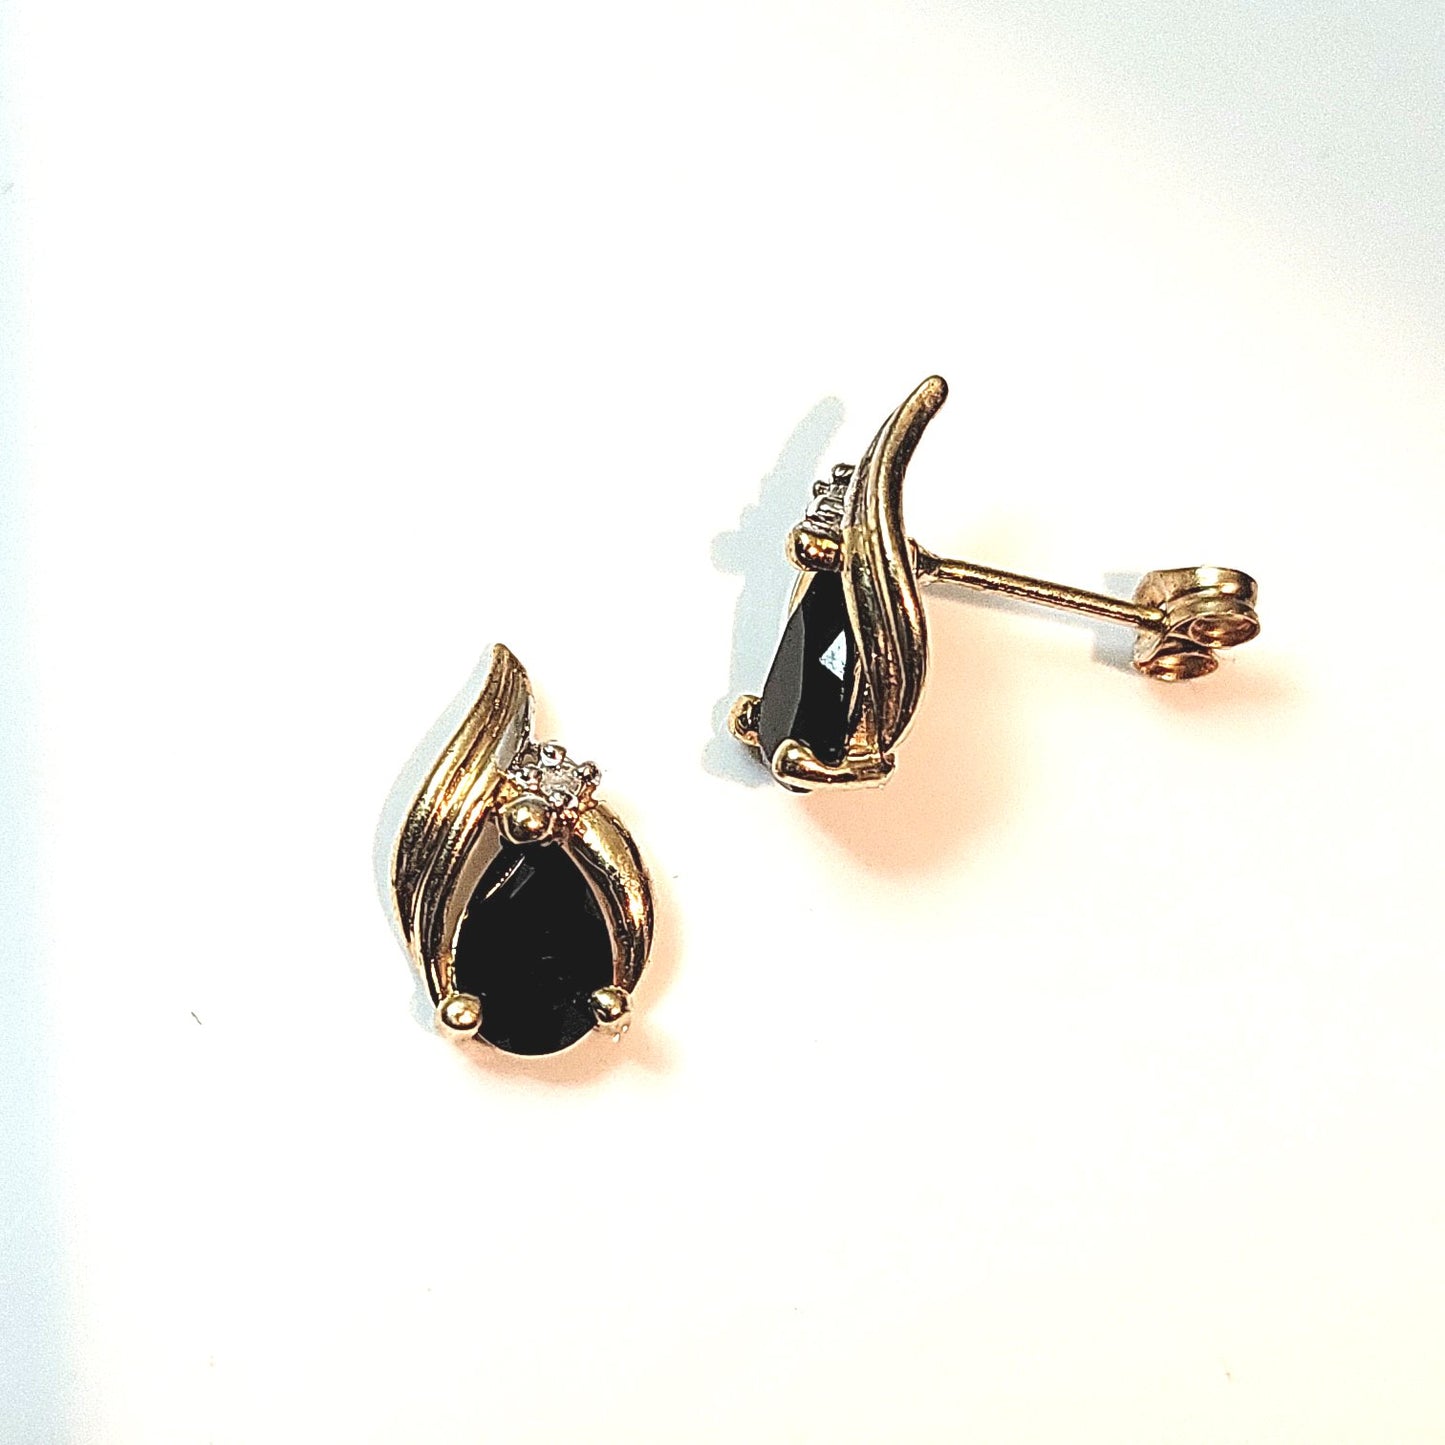 10k Yellow Gold and Black Onyx Earrings